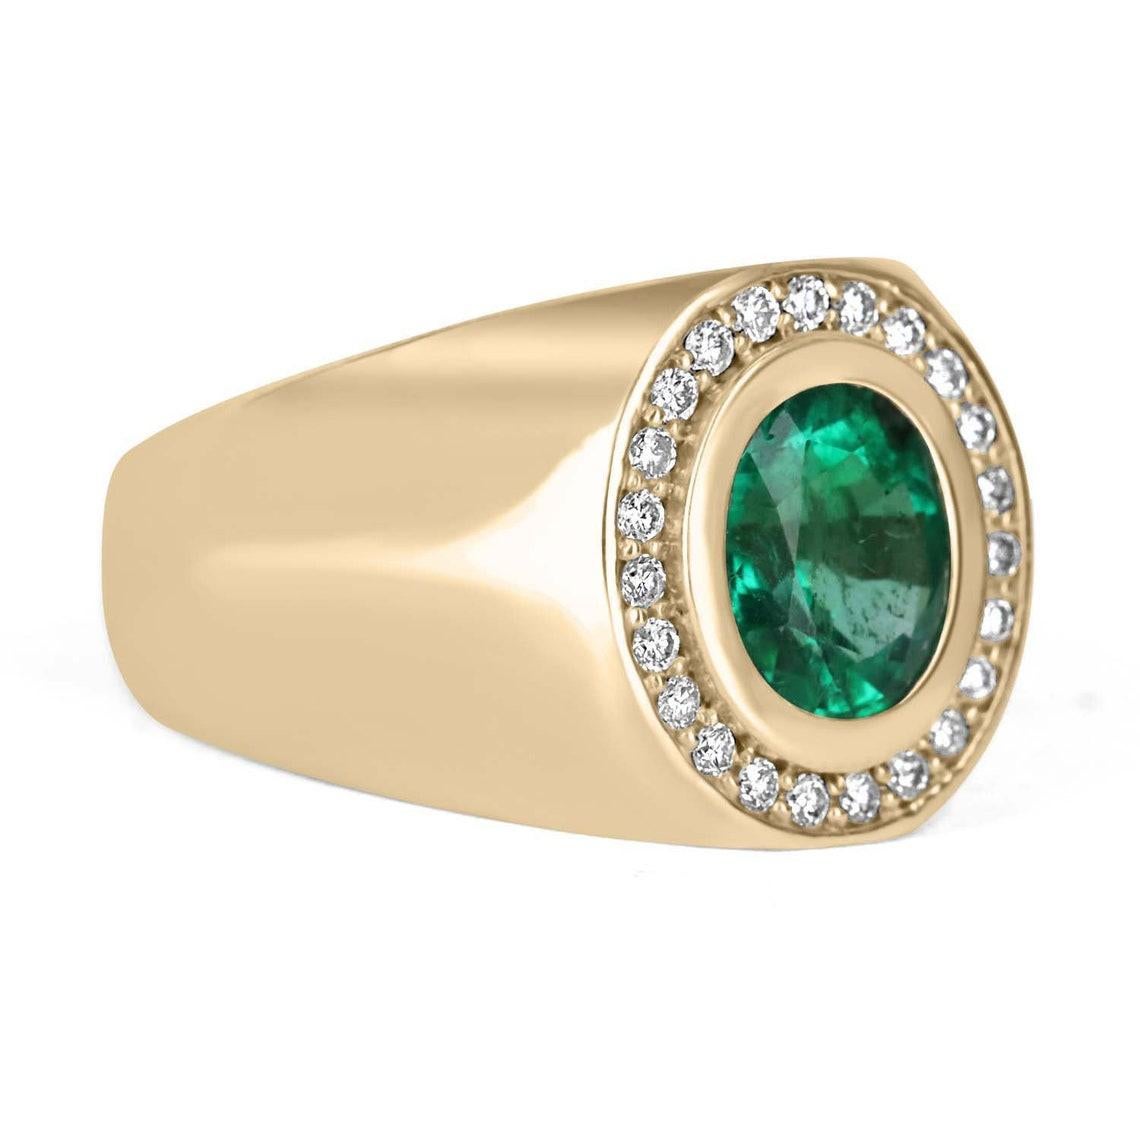 An important Colombian emerald and diamond men's cocktail ring. A large 1.70-carat emerald is bezel set in the very center. The men's ring is made in solid 14K yellow gold and is accented by brilliant round diamonds. This ring has excellent spread